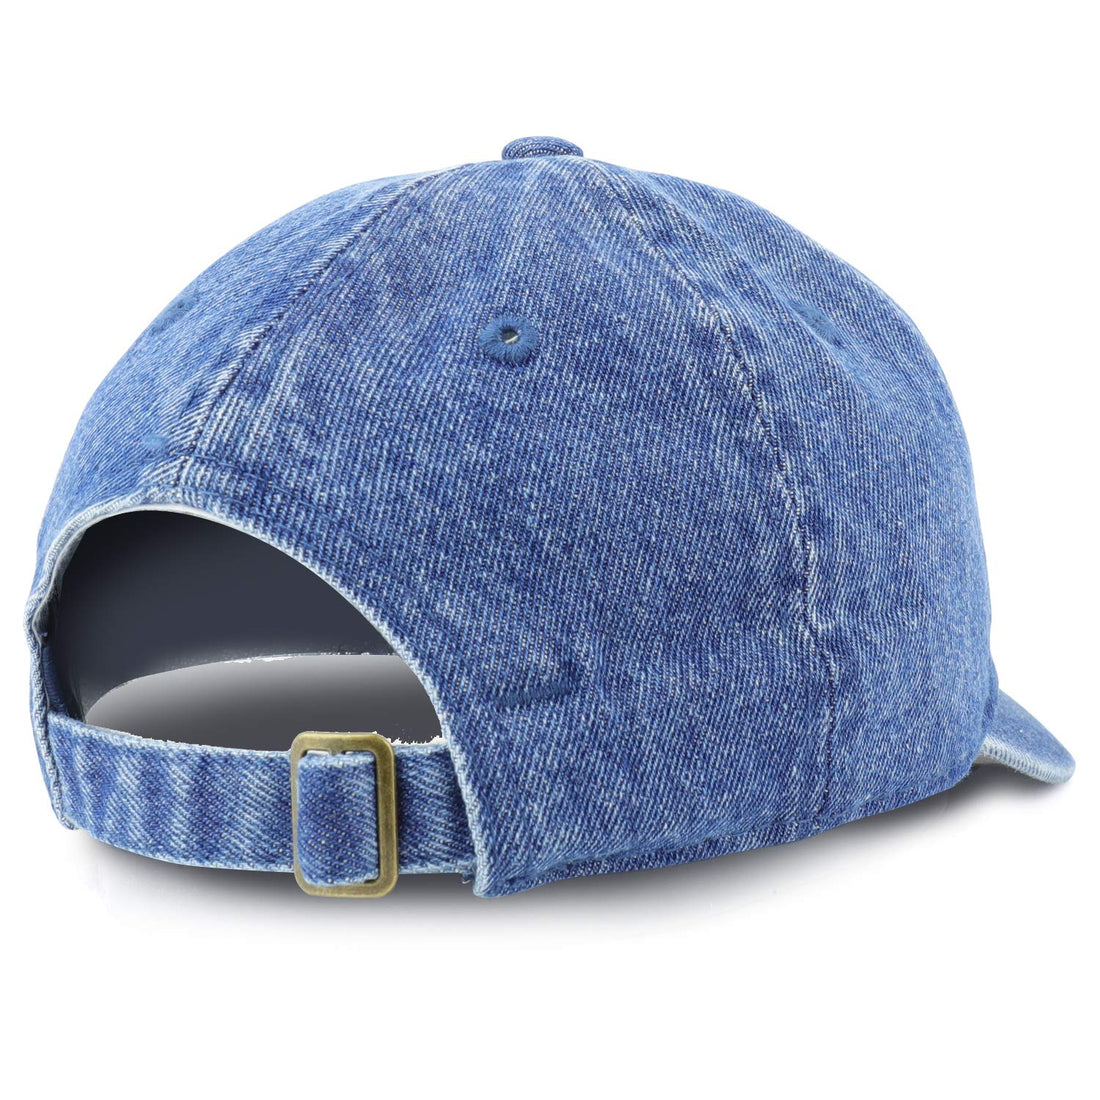 Trendy Apparel Shop Kid's Youth Size Unstructured Relax Fit Denim Baseball Cap